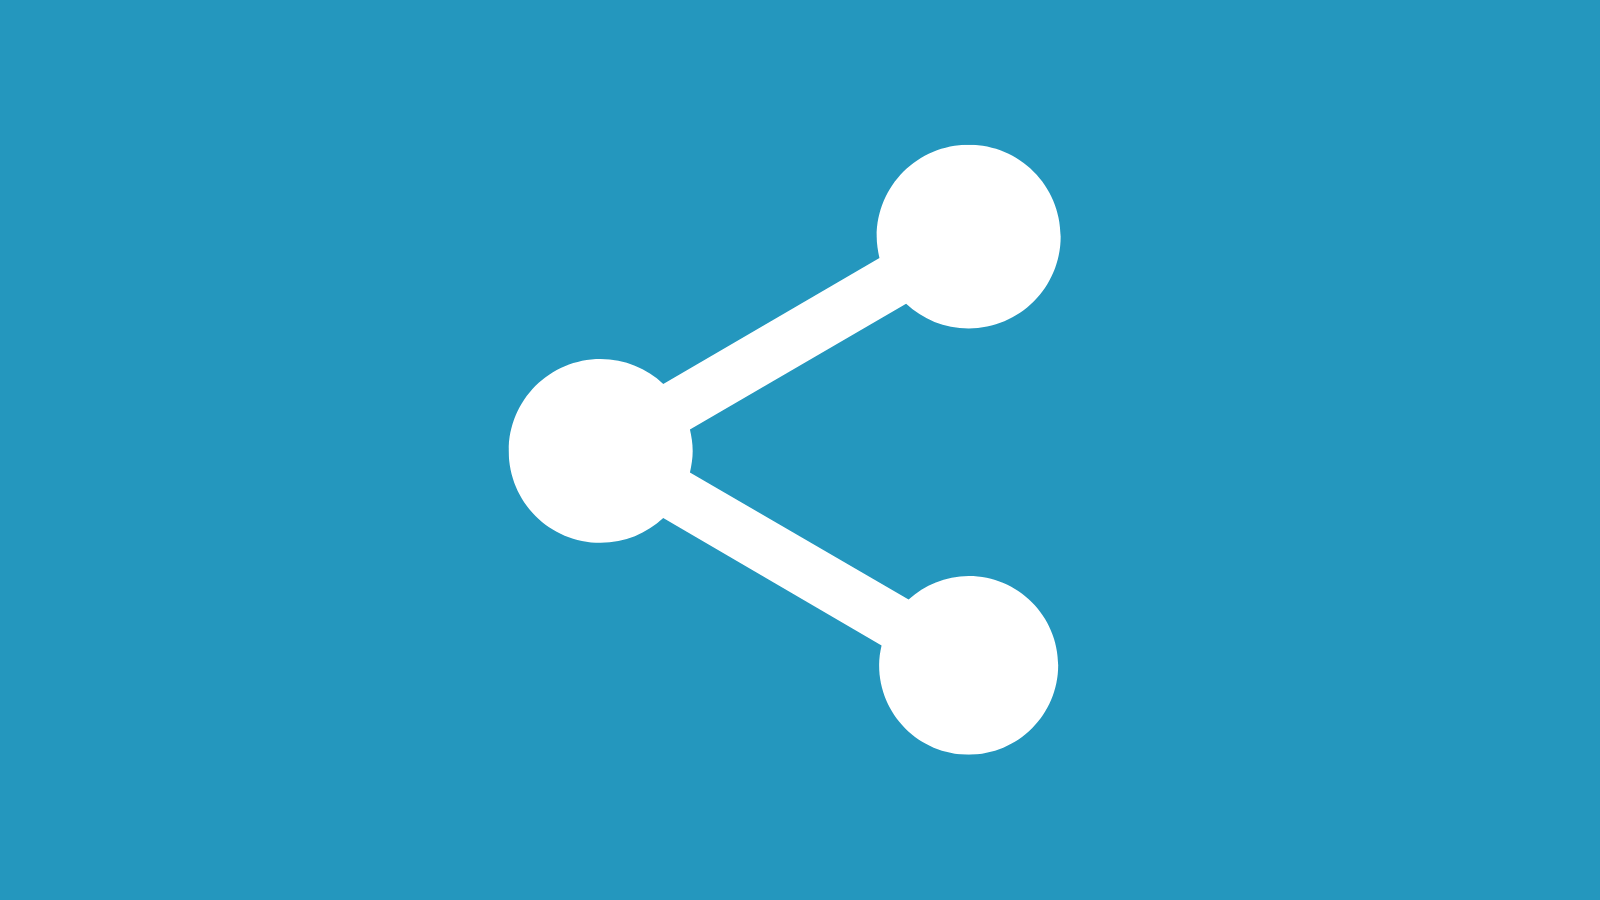 The share symbol with the three dots and two lines connecting them at an angle